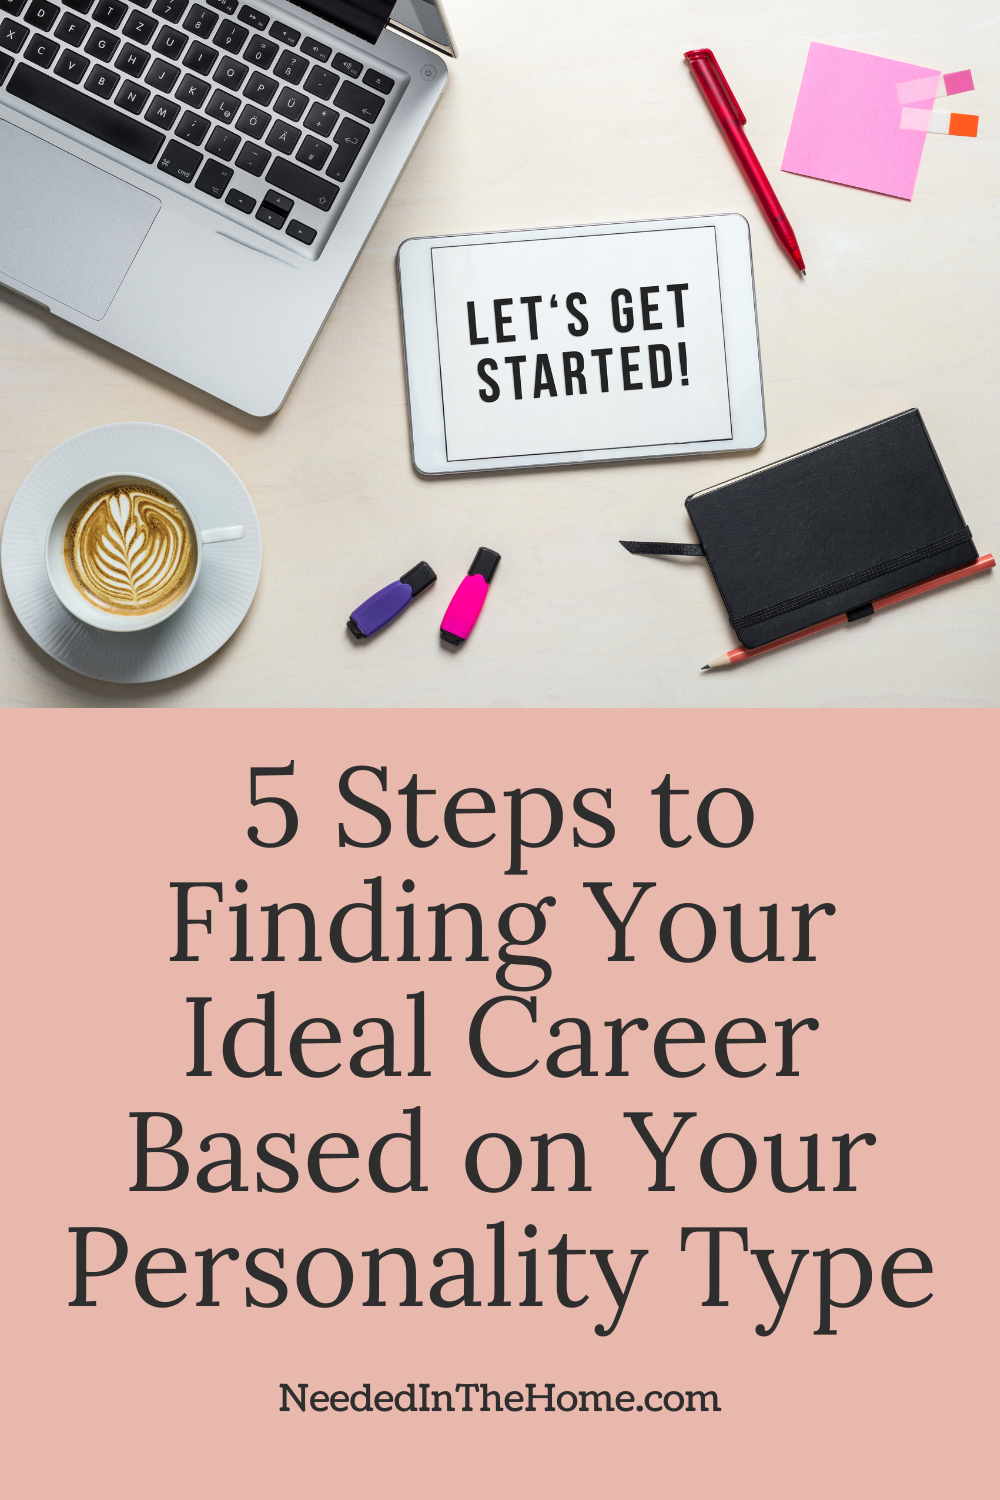 pinterest pin description 5 steps to finding your ideal career based on your personality type laptop ipad with wording let's get started coffee pens paper neededinthehome